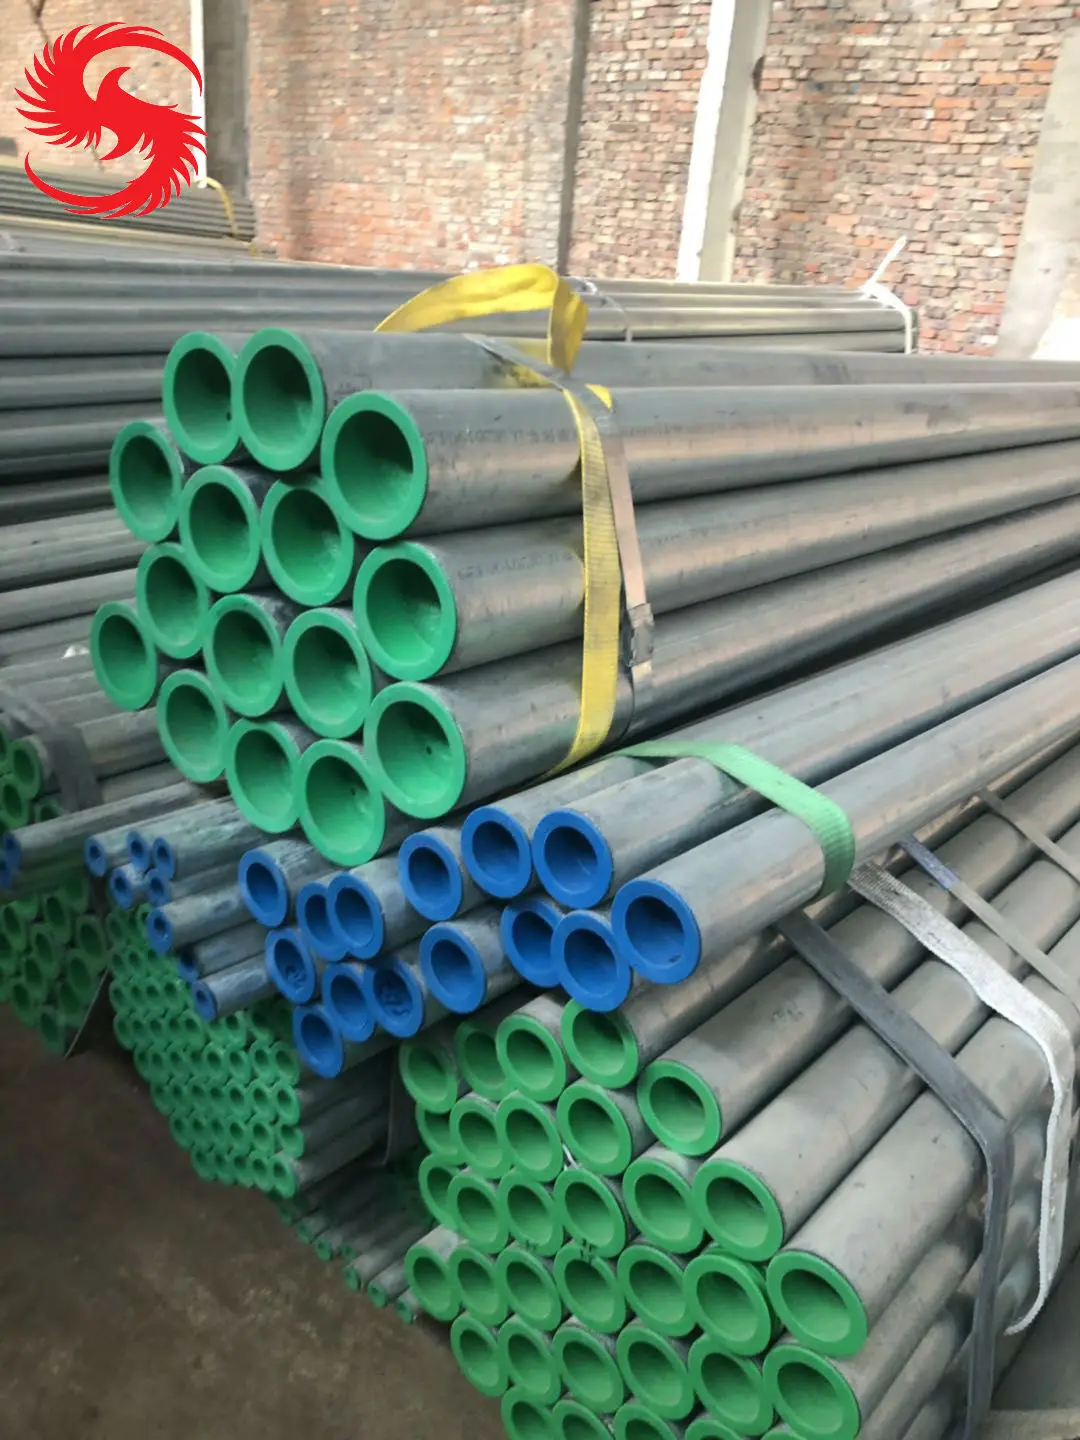 lining plastic galvanized steel pipes for water supply